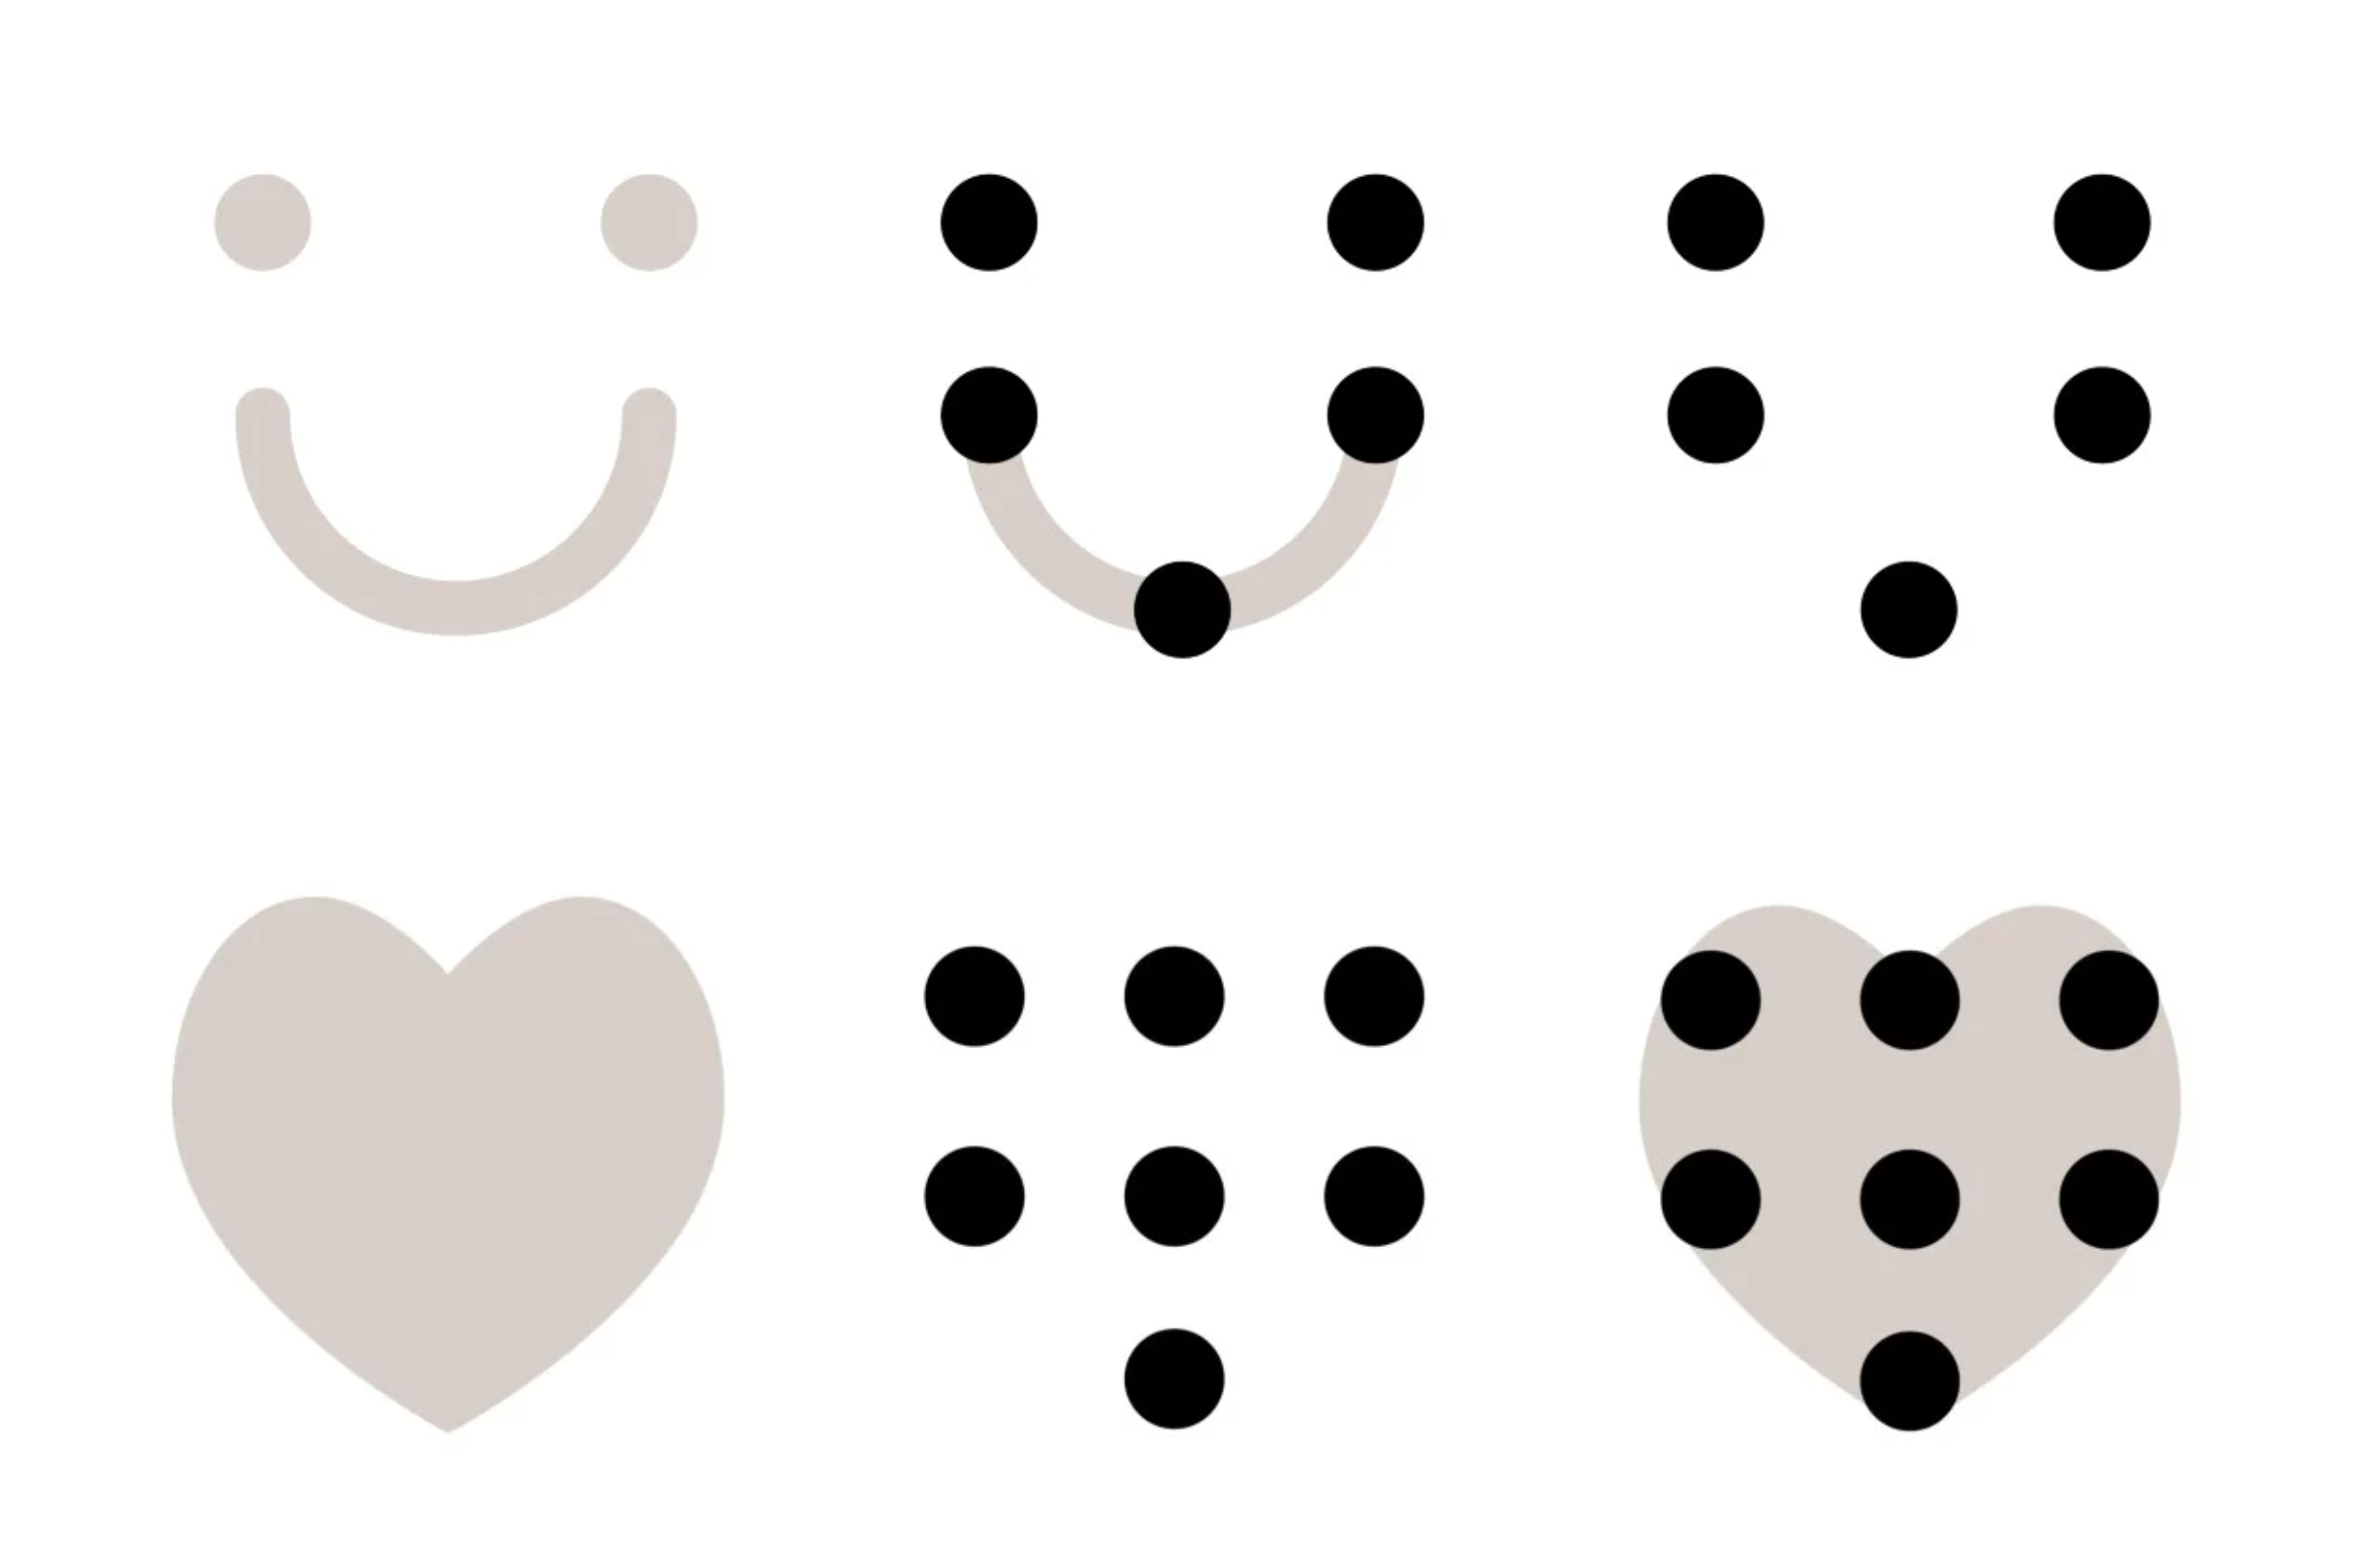 Braille Meets Emoticons